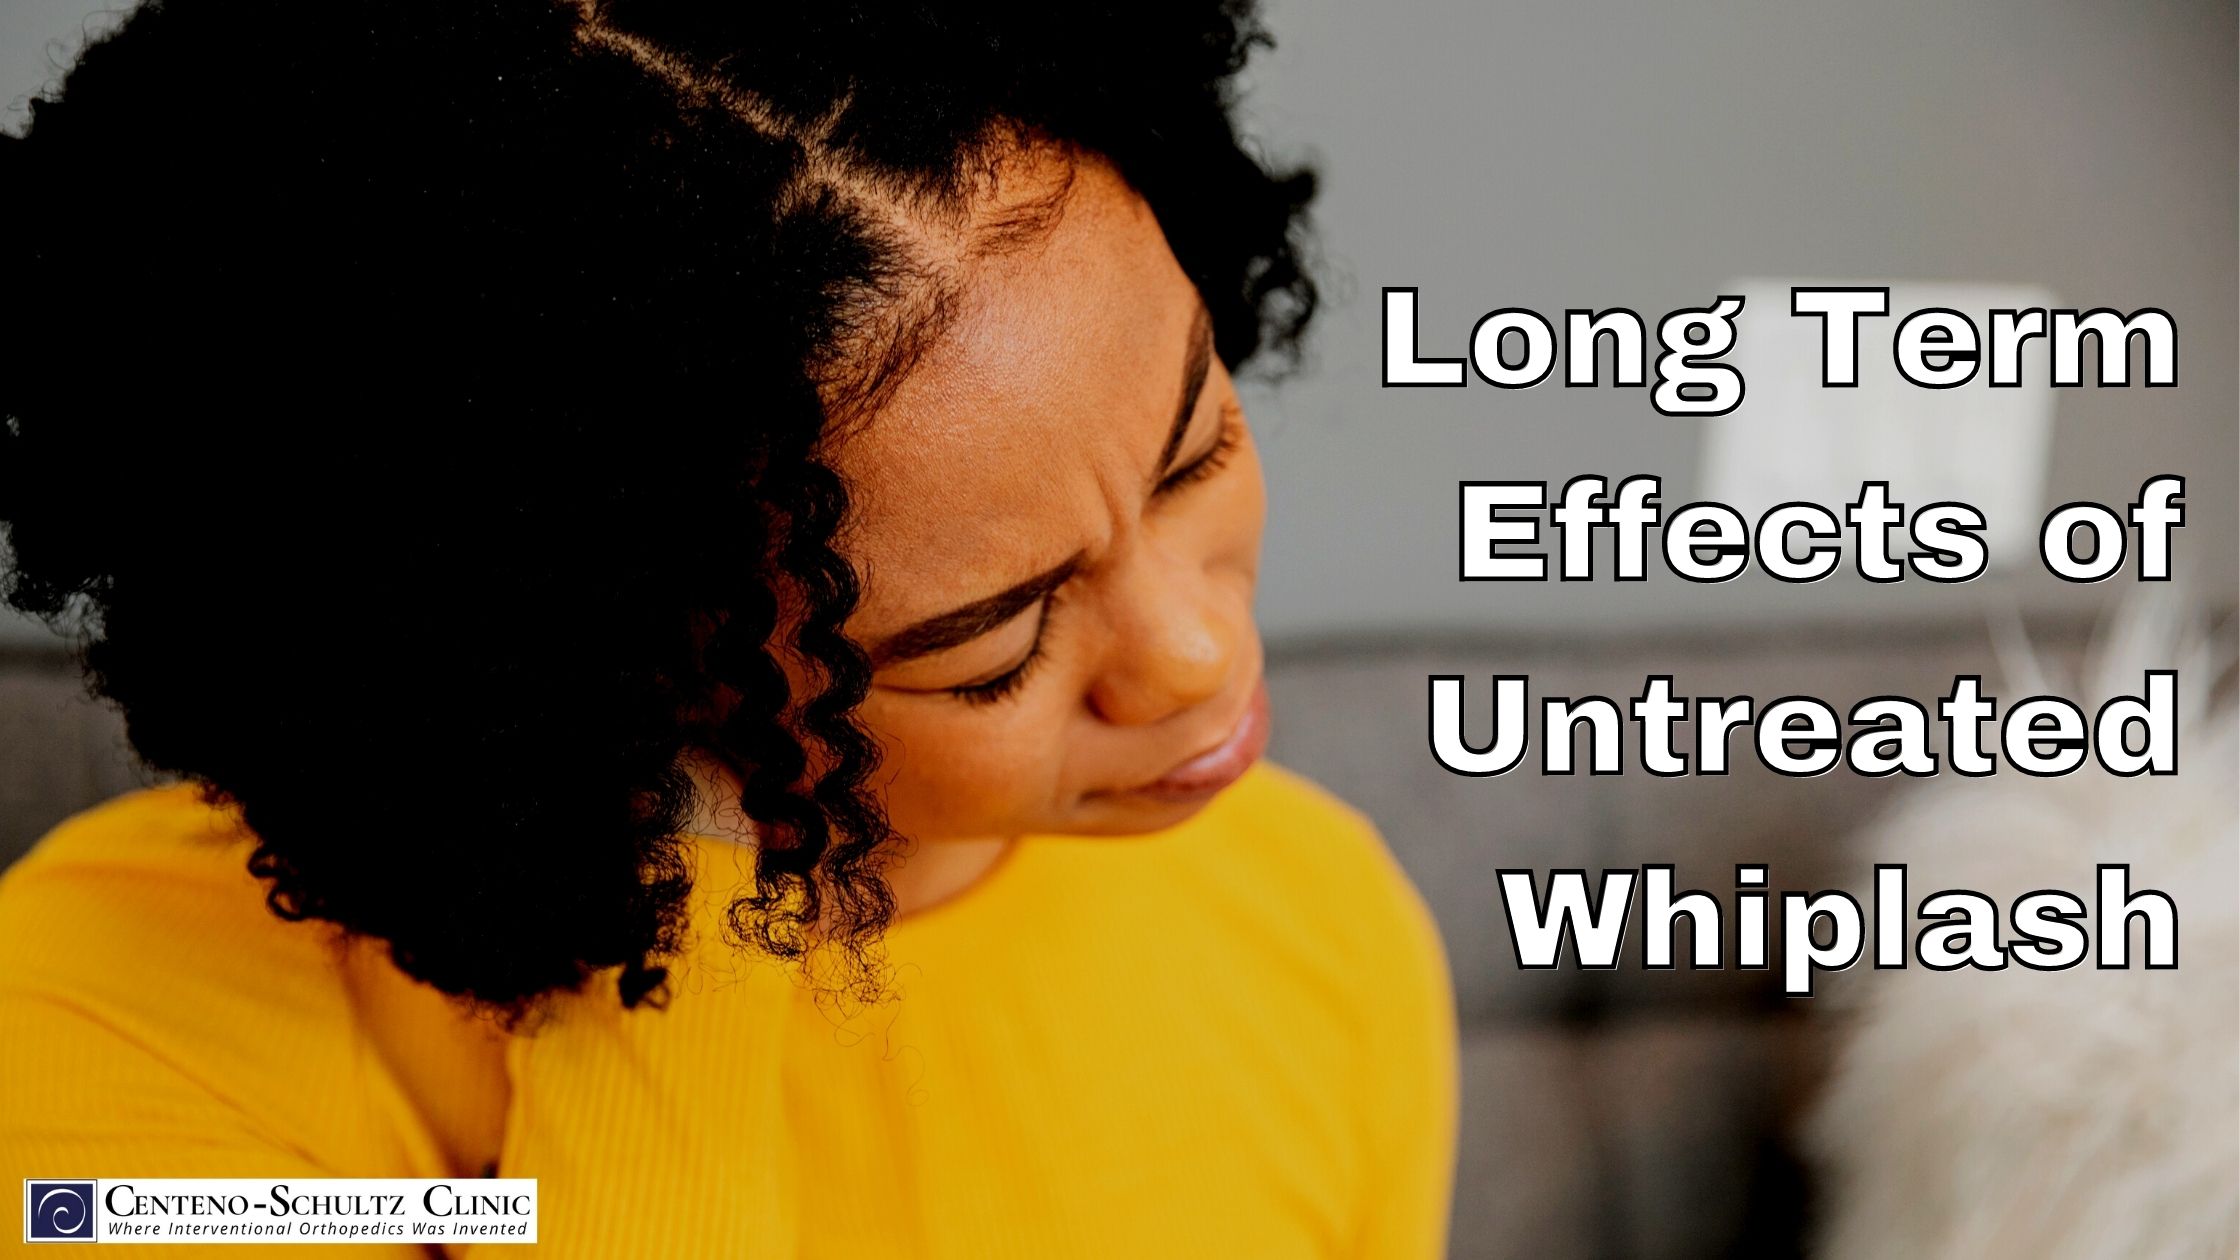 what are the longterm effects of untreated whiplash